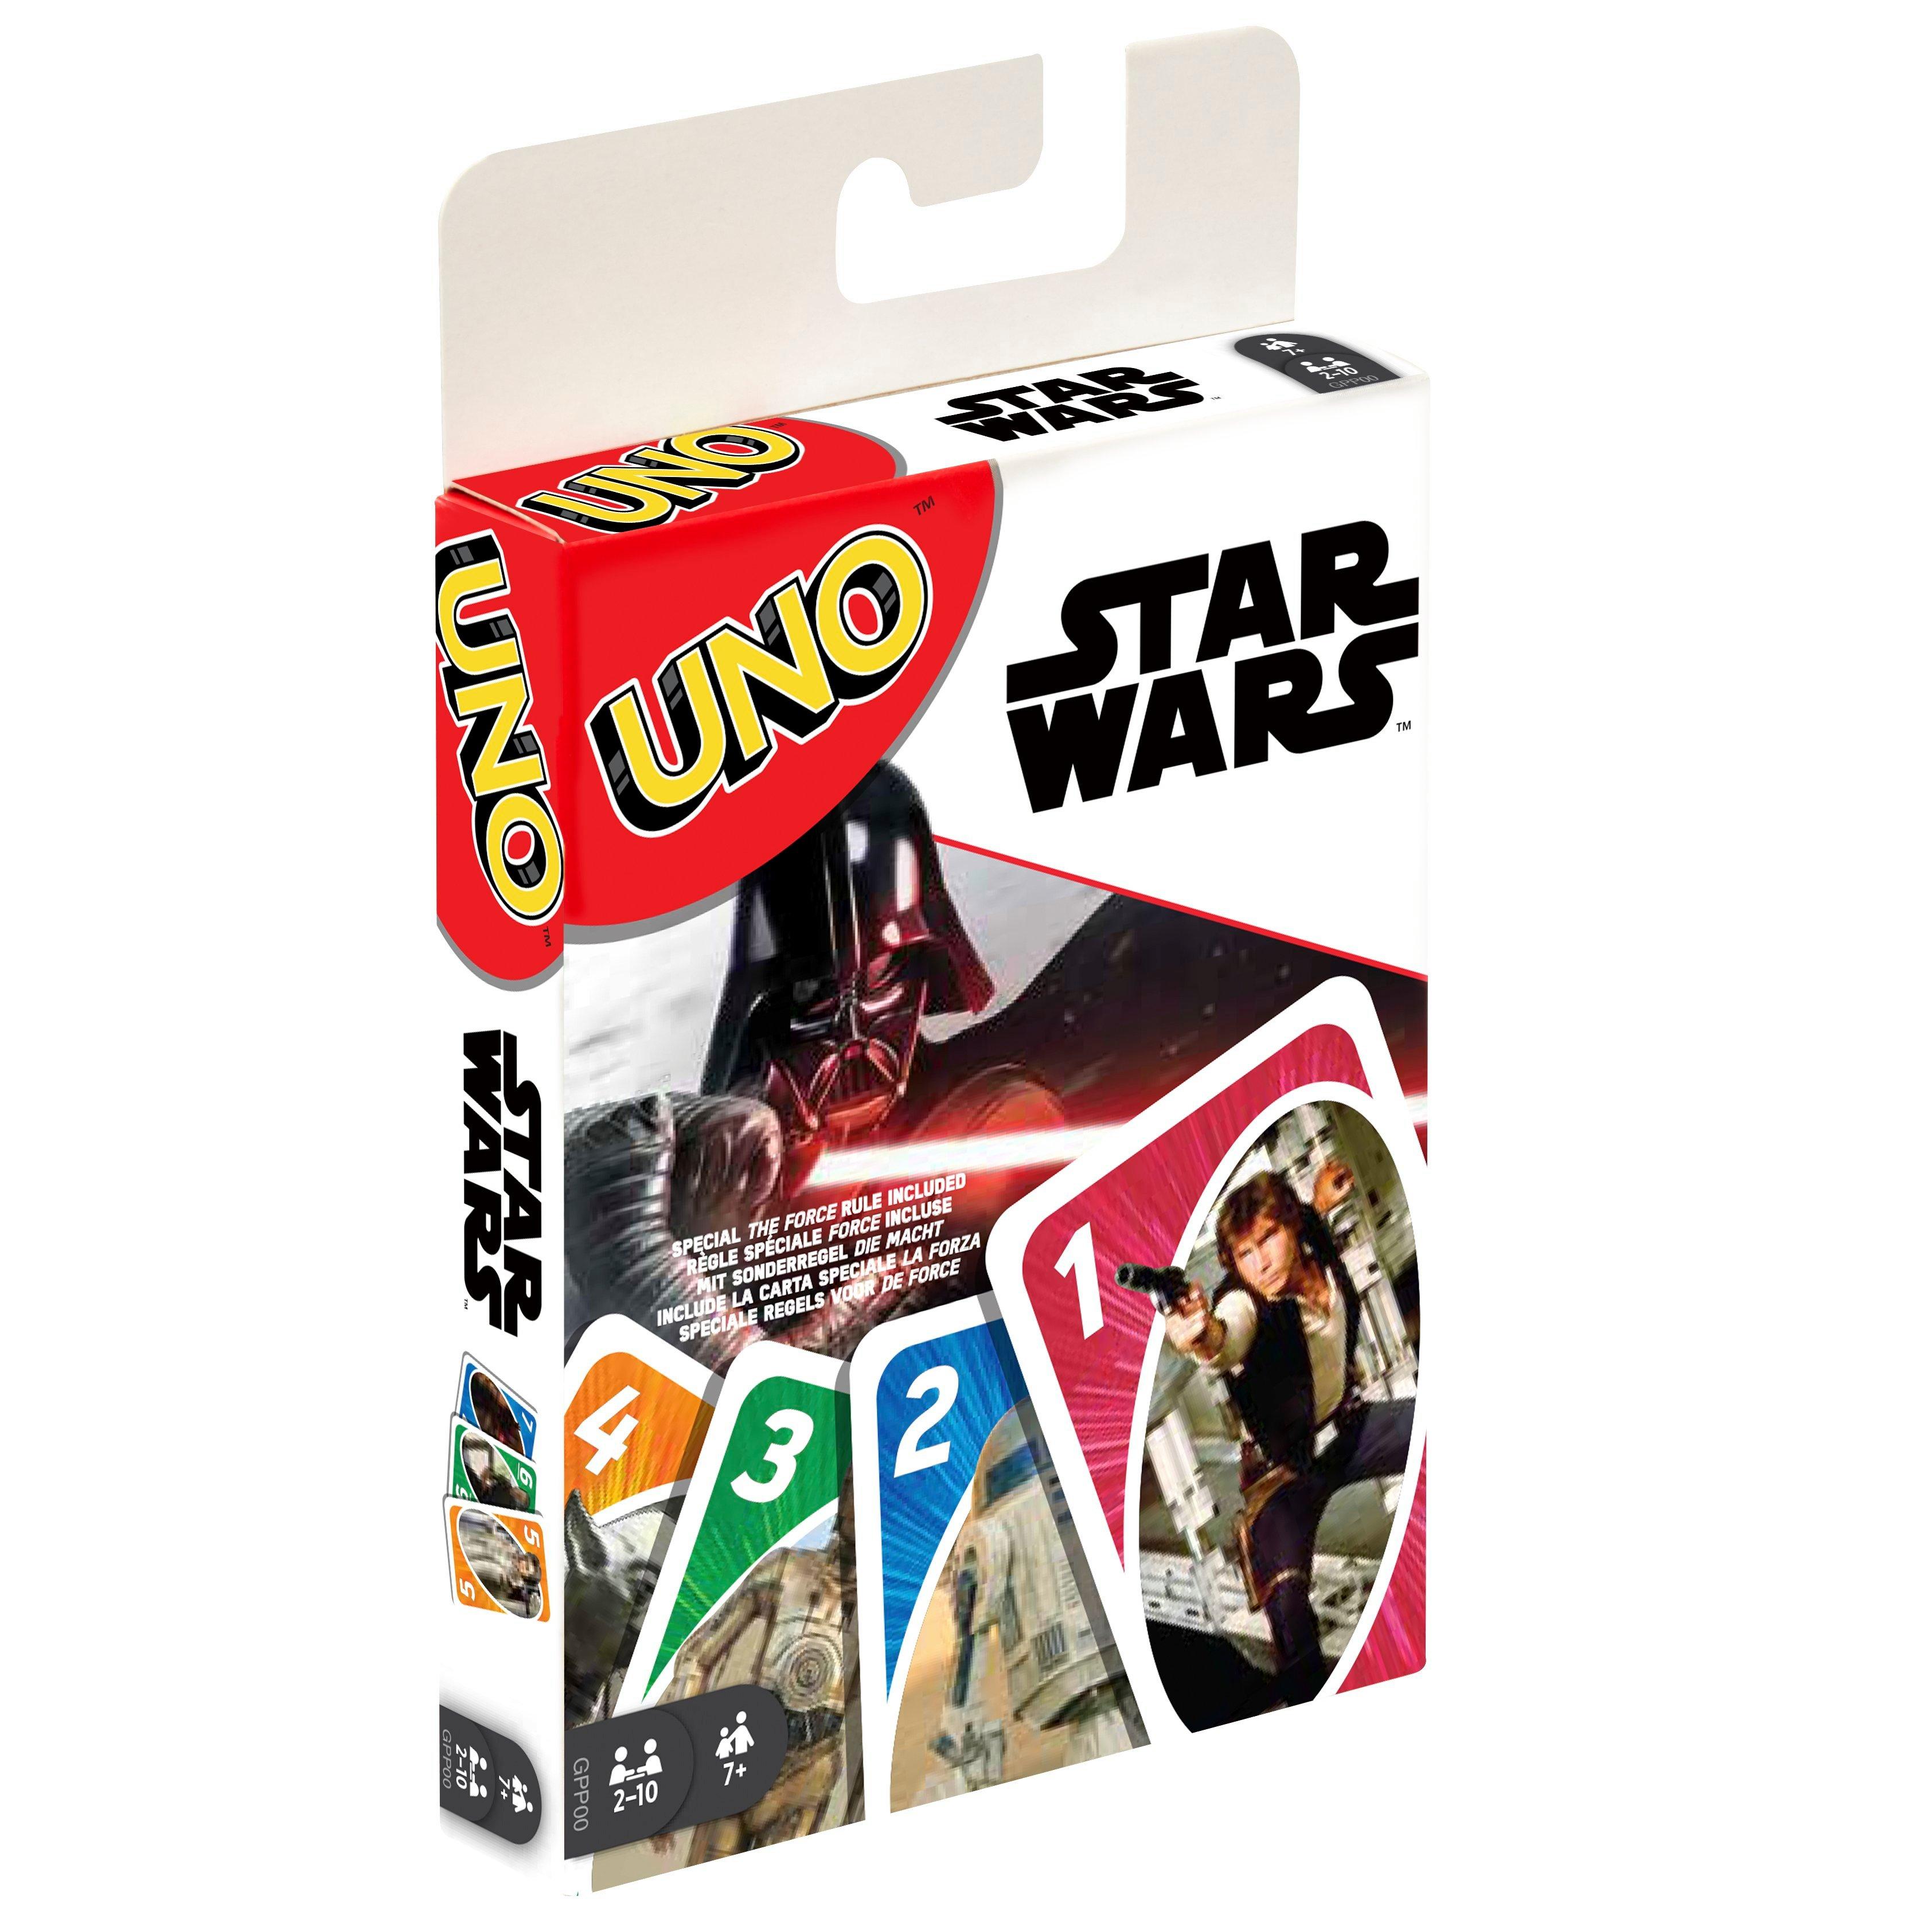 Uno First Look Review - Family Fun Games 